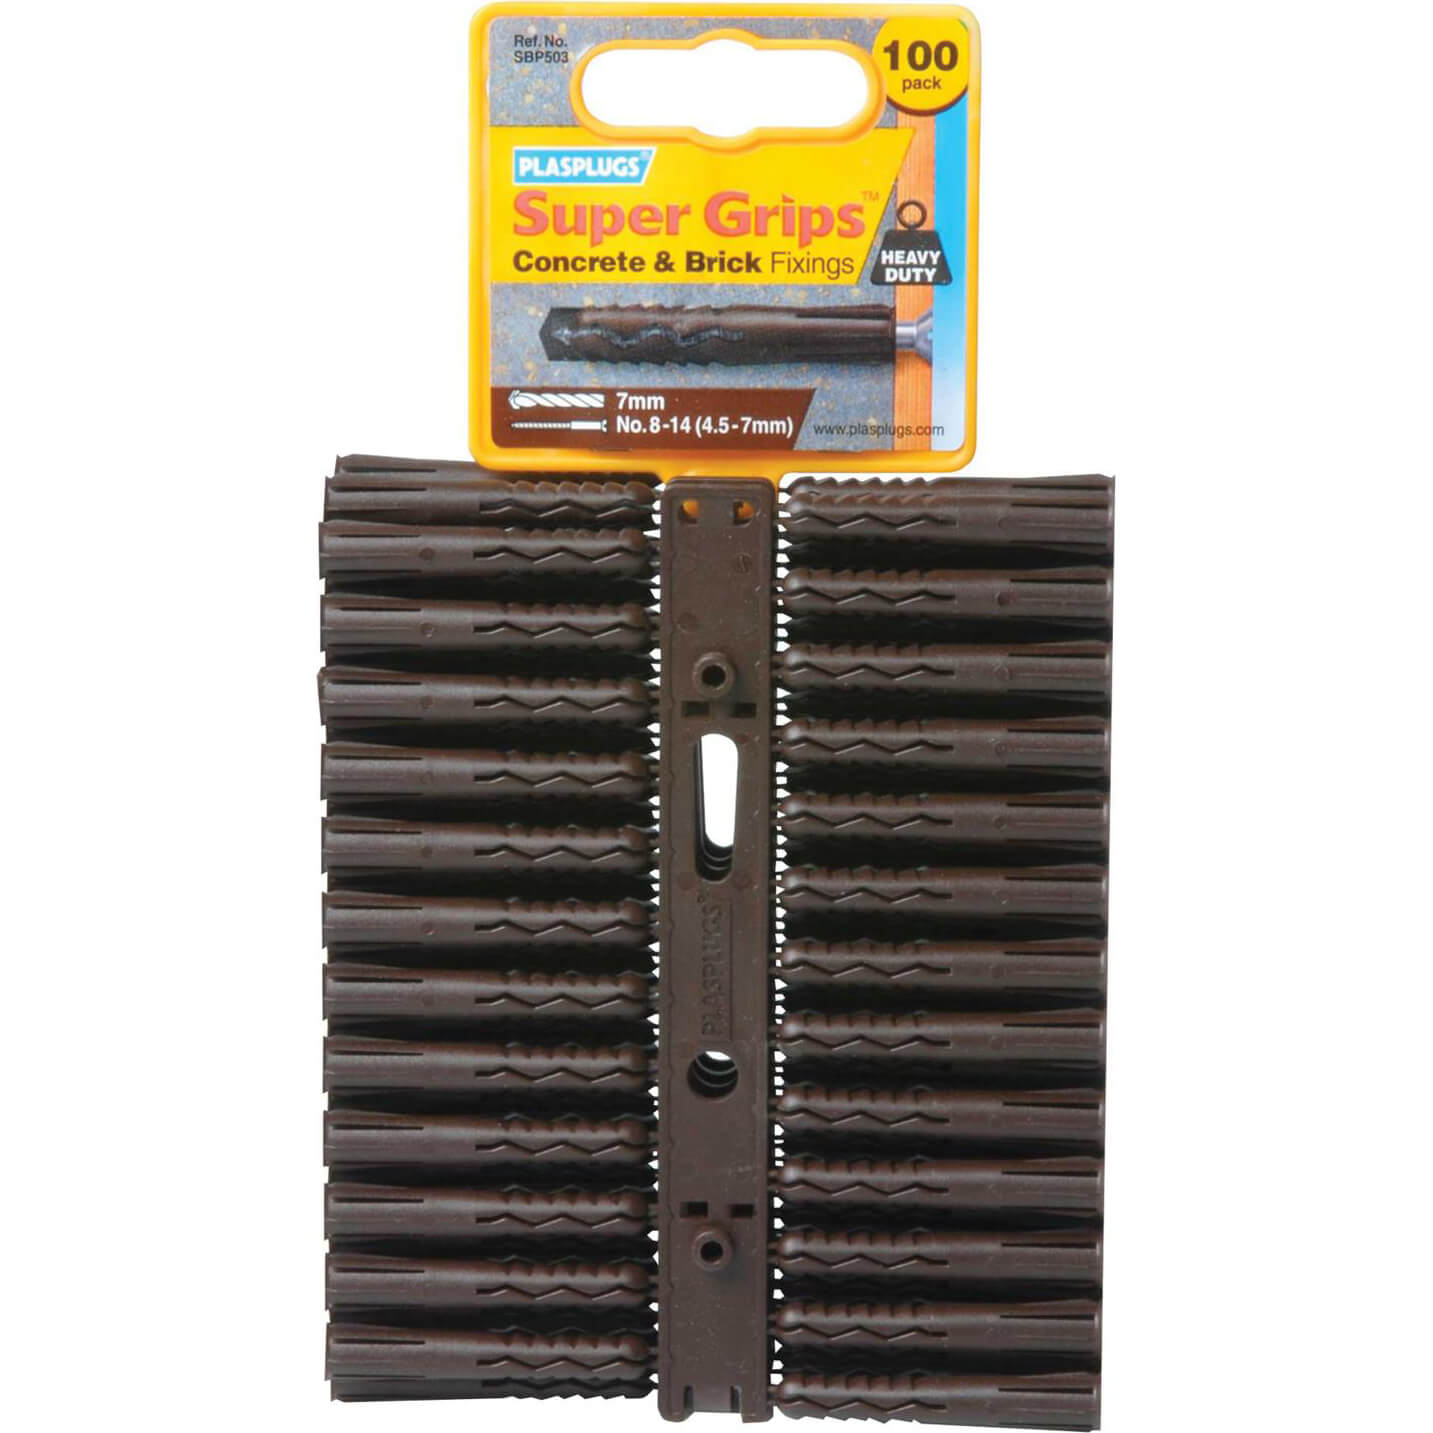 Image of Plasplugs Heavy Duty Super Grips Concrete and Brick Fixings Pack of 100